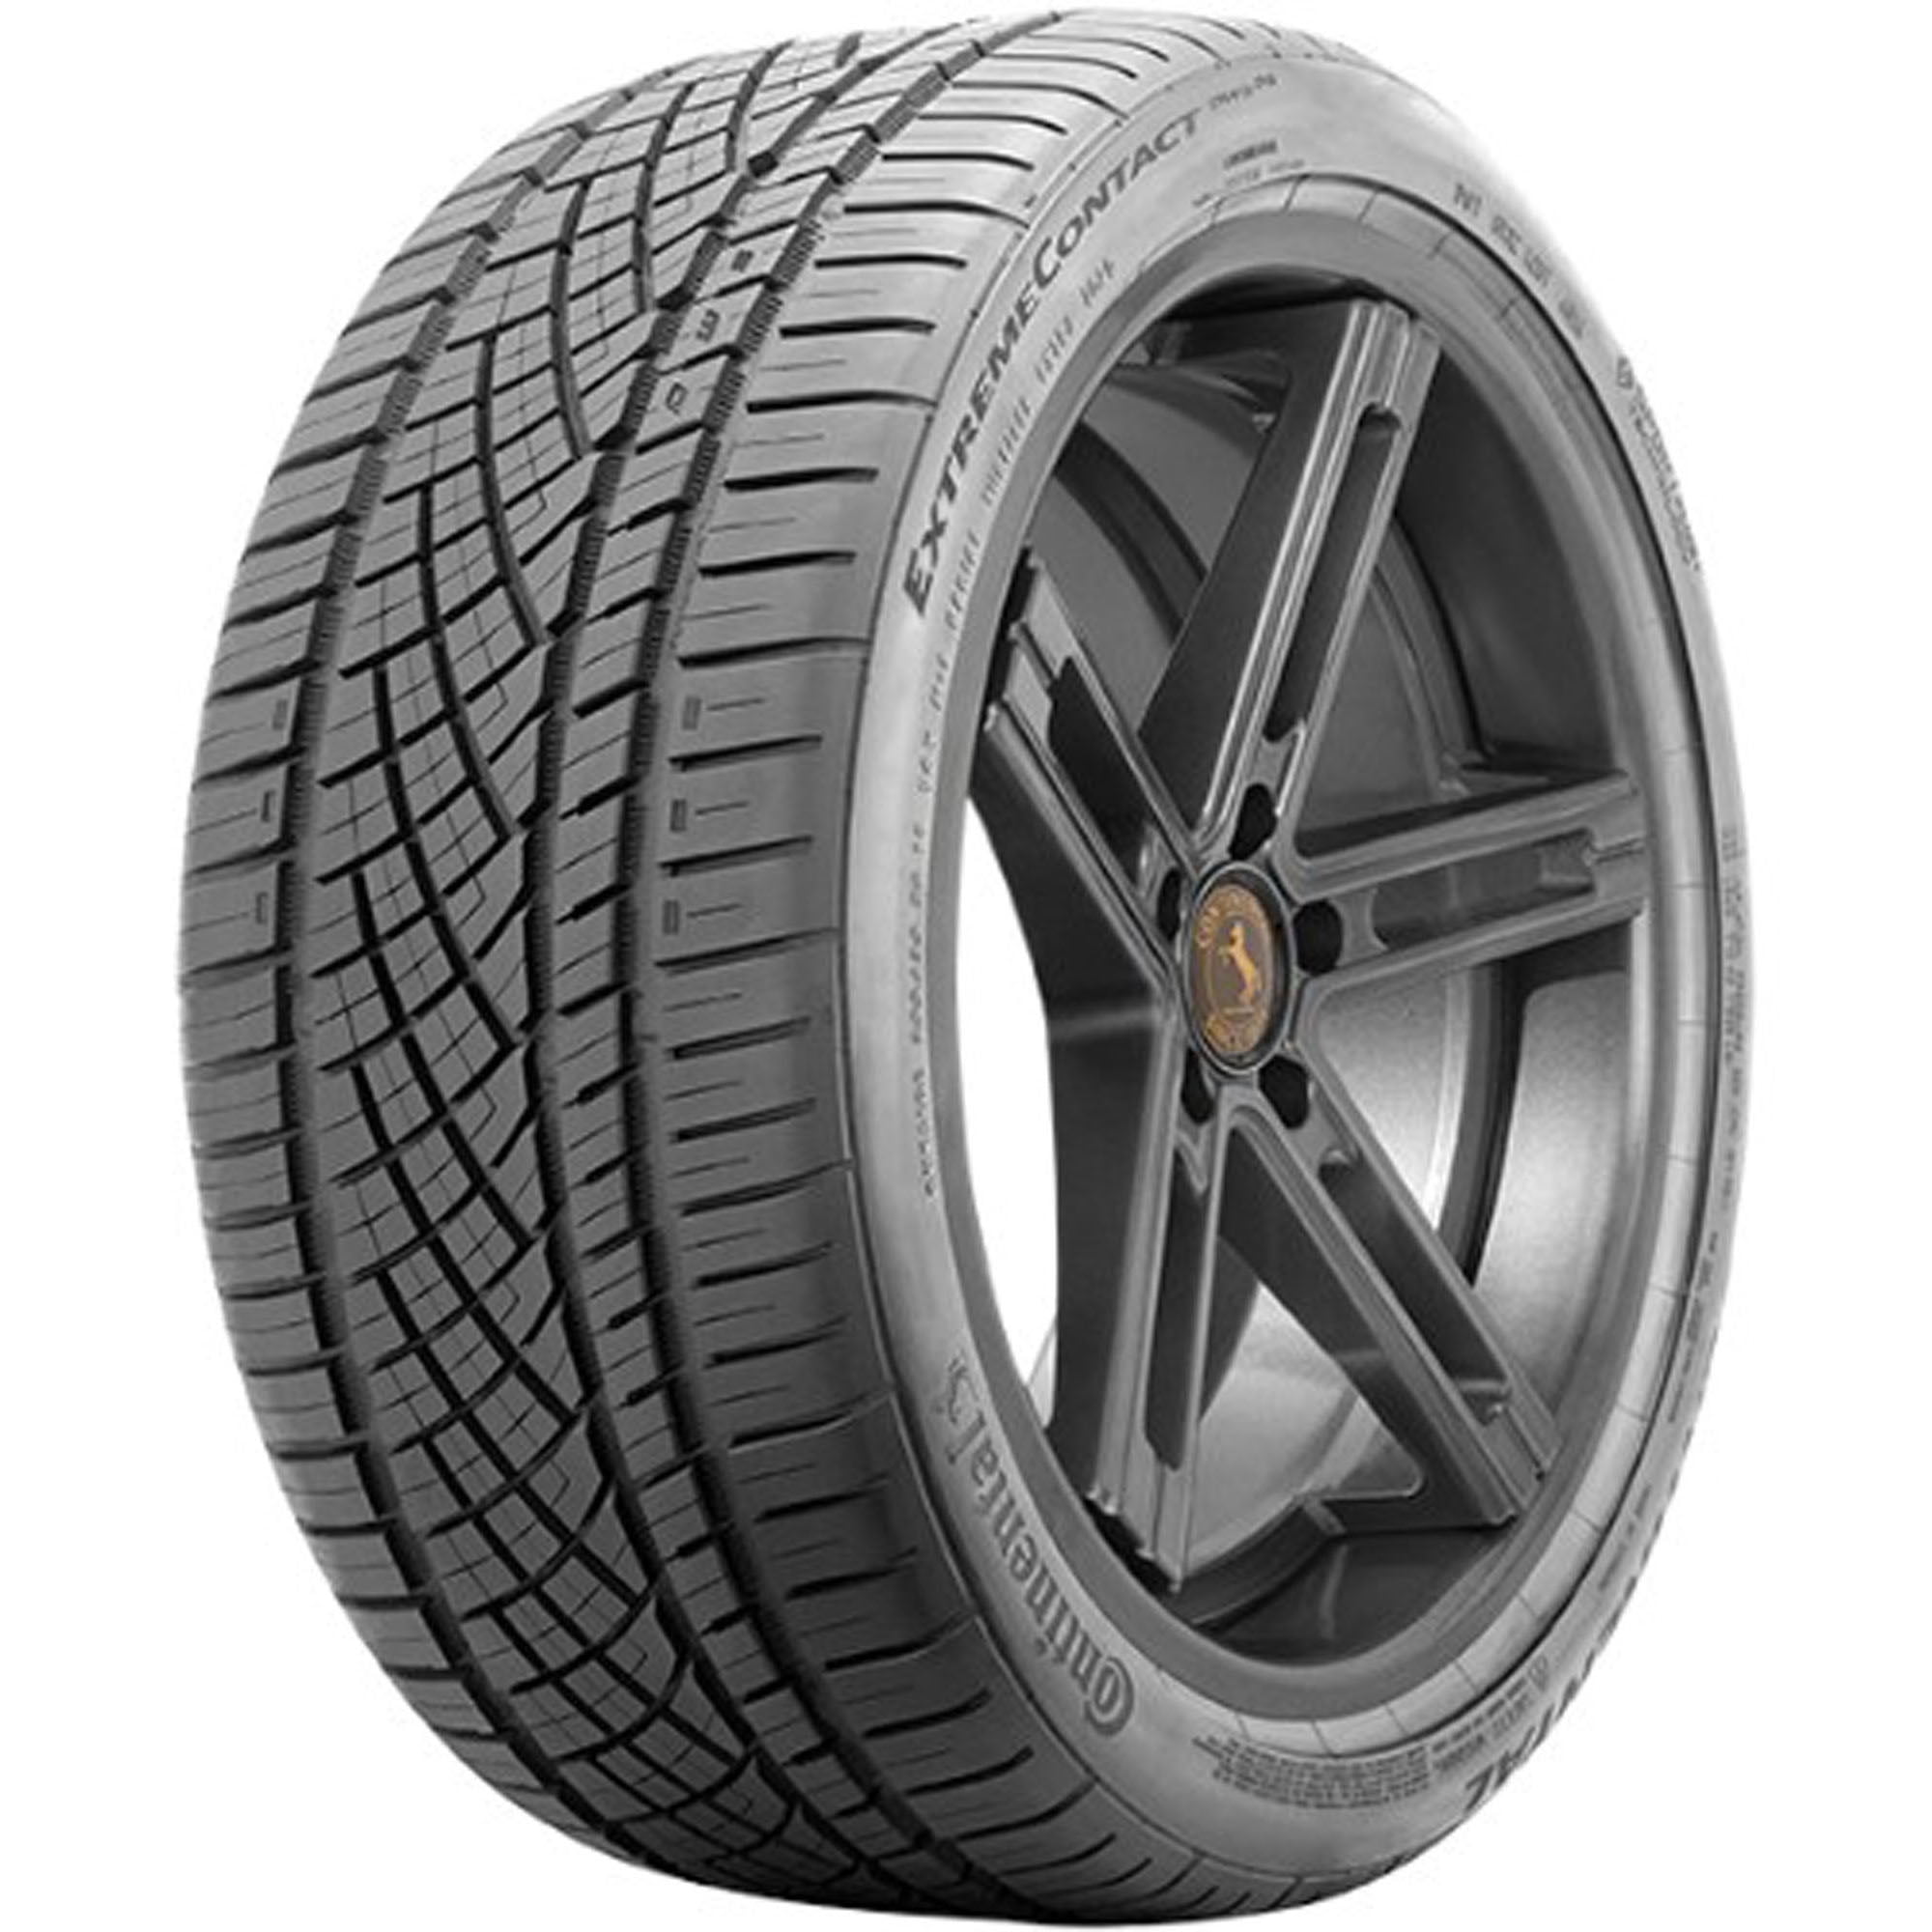 Continental ExtremeContact DWS06 UHP All Season 255/45ZR18 103Y XL  Passenger Tire